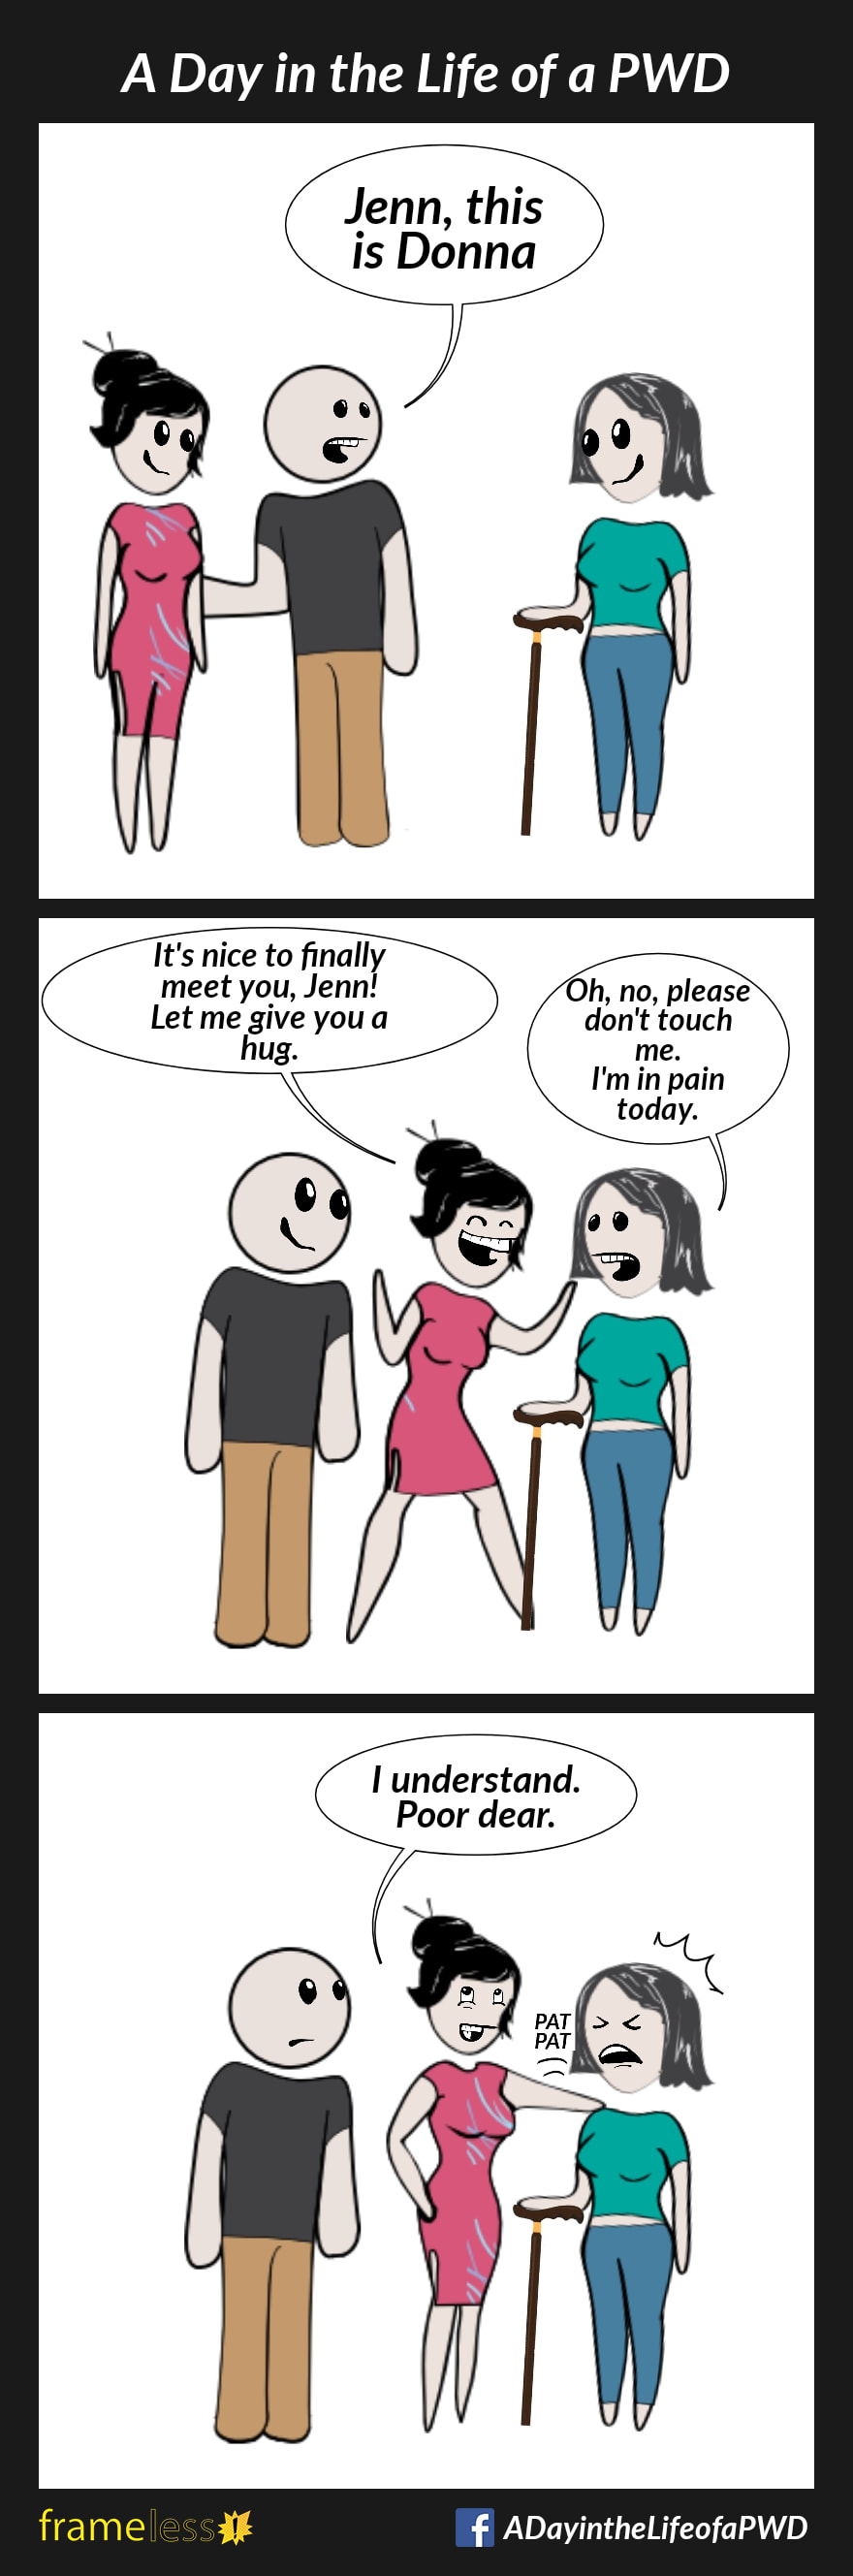 COMIC STRIP 
A Day in the Life of a PWD (Person With a Disability) 

Frame 1:
Jenn, who uses a walking cane, is approached by a friend and his new girlfriend, Donna. 
FRIEND: Jenn, this is Donna

Frame 2:
DONNA: It's nice to finally meet you, Jenn! Let me give you a hug.
JENN: Oh, no, please don't touch me. I'm in pain today.

Frame 3:
DONNA: I understand. Poor dear.
Donna pats Jenn's shoulder. Jenn winces in pain.